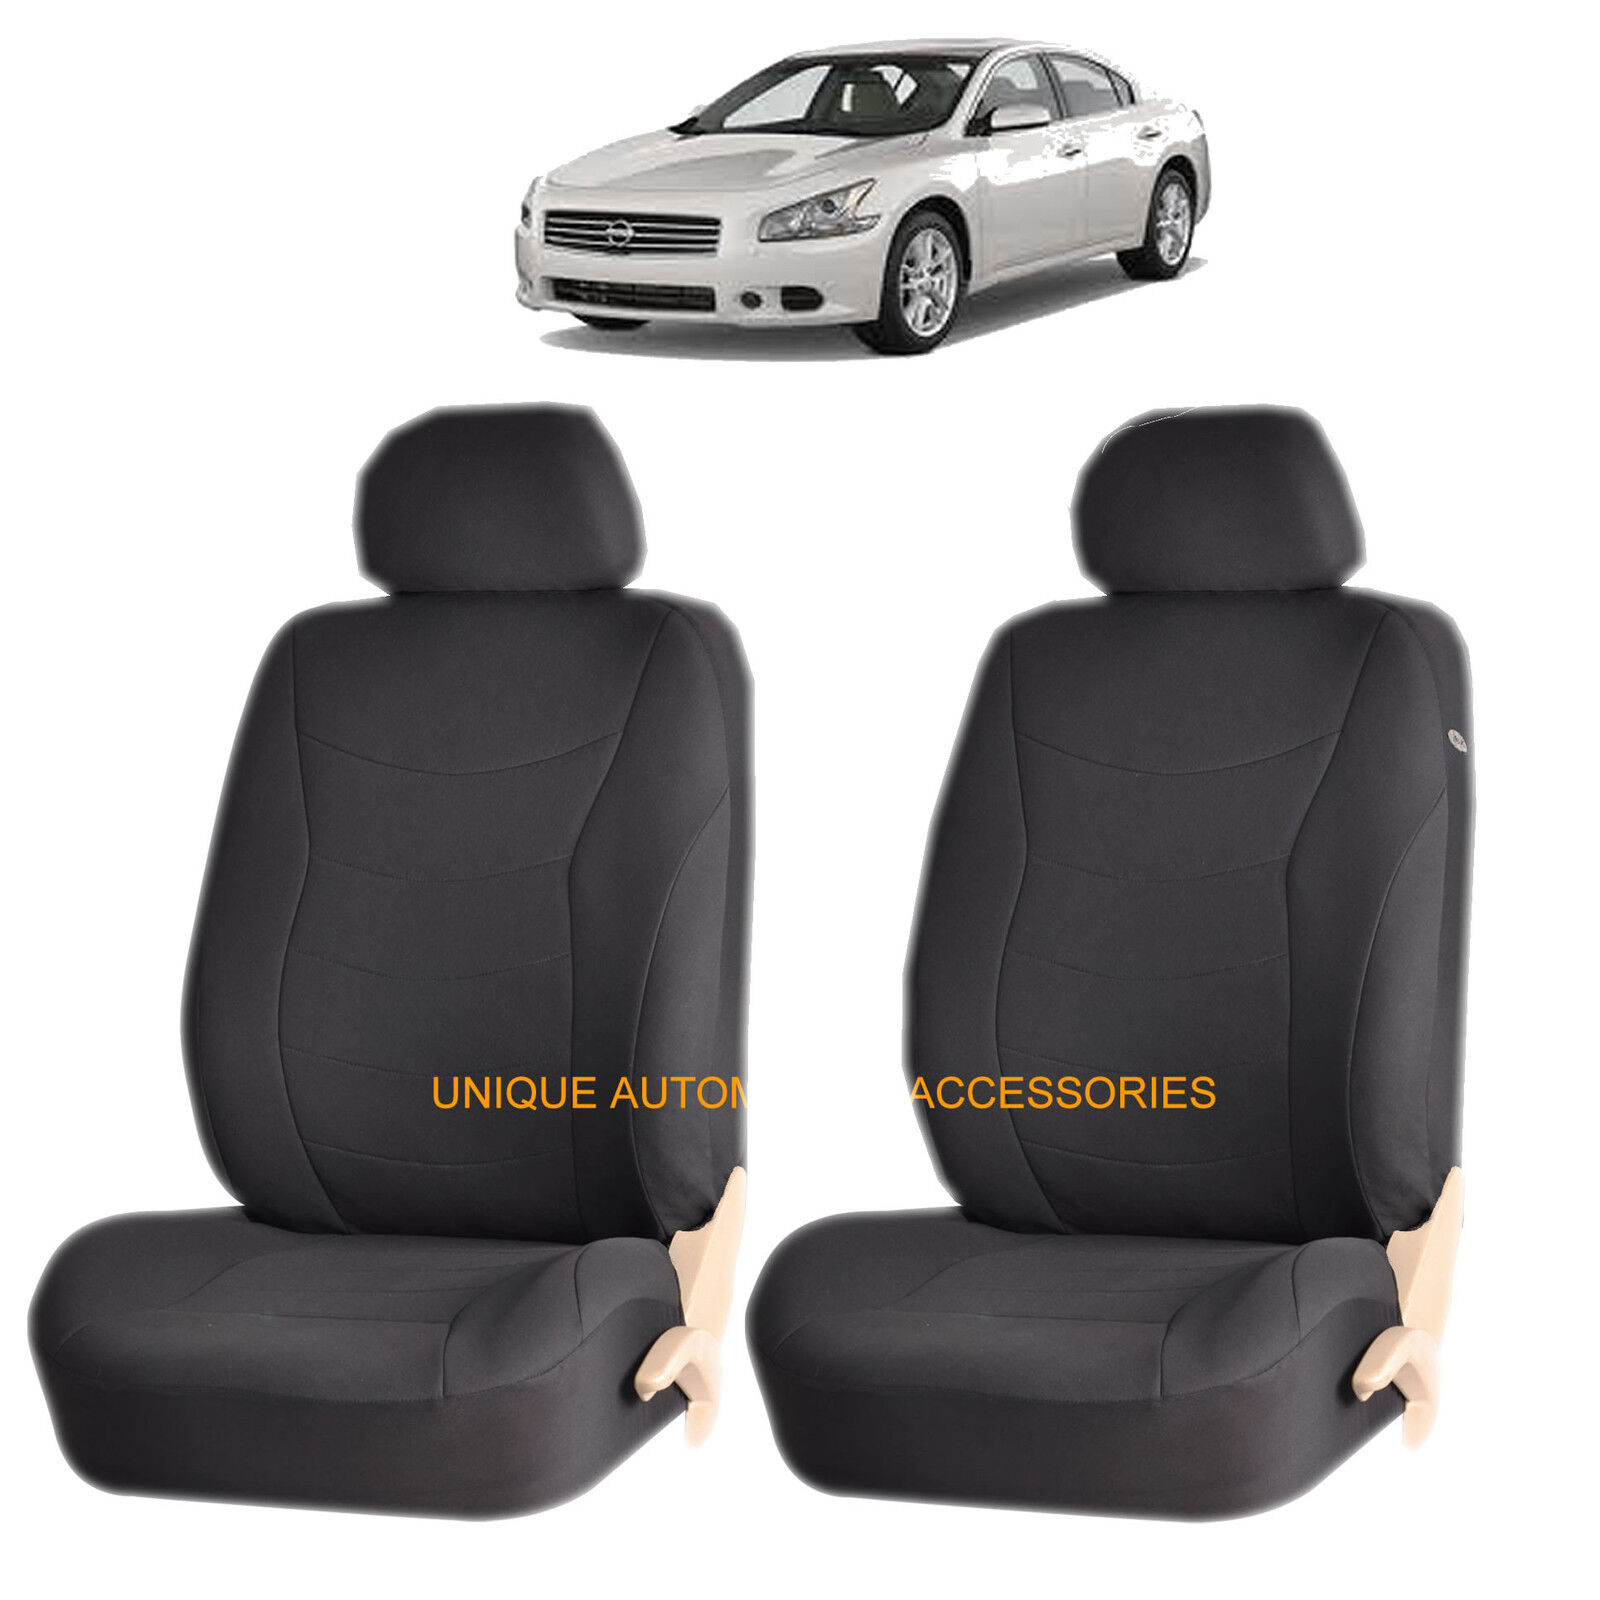 BLACK SPEED AIRBAG COMPATIBLE FRONT SEAT COVER SET for NISSAN ALTIMA SENTRA